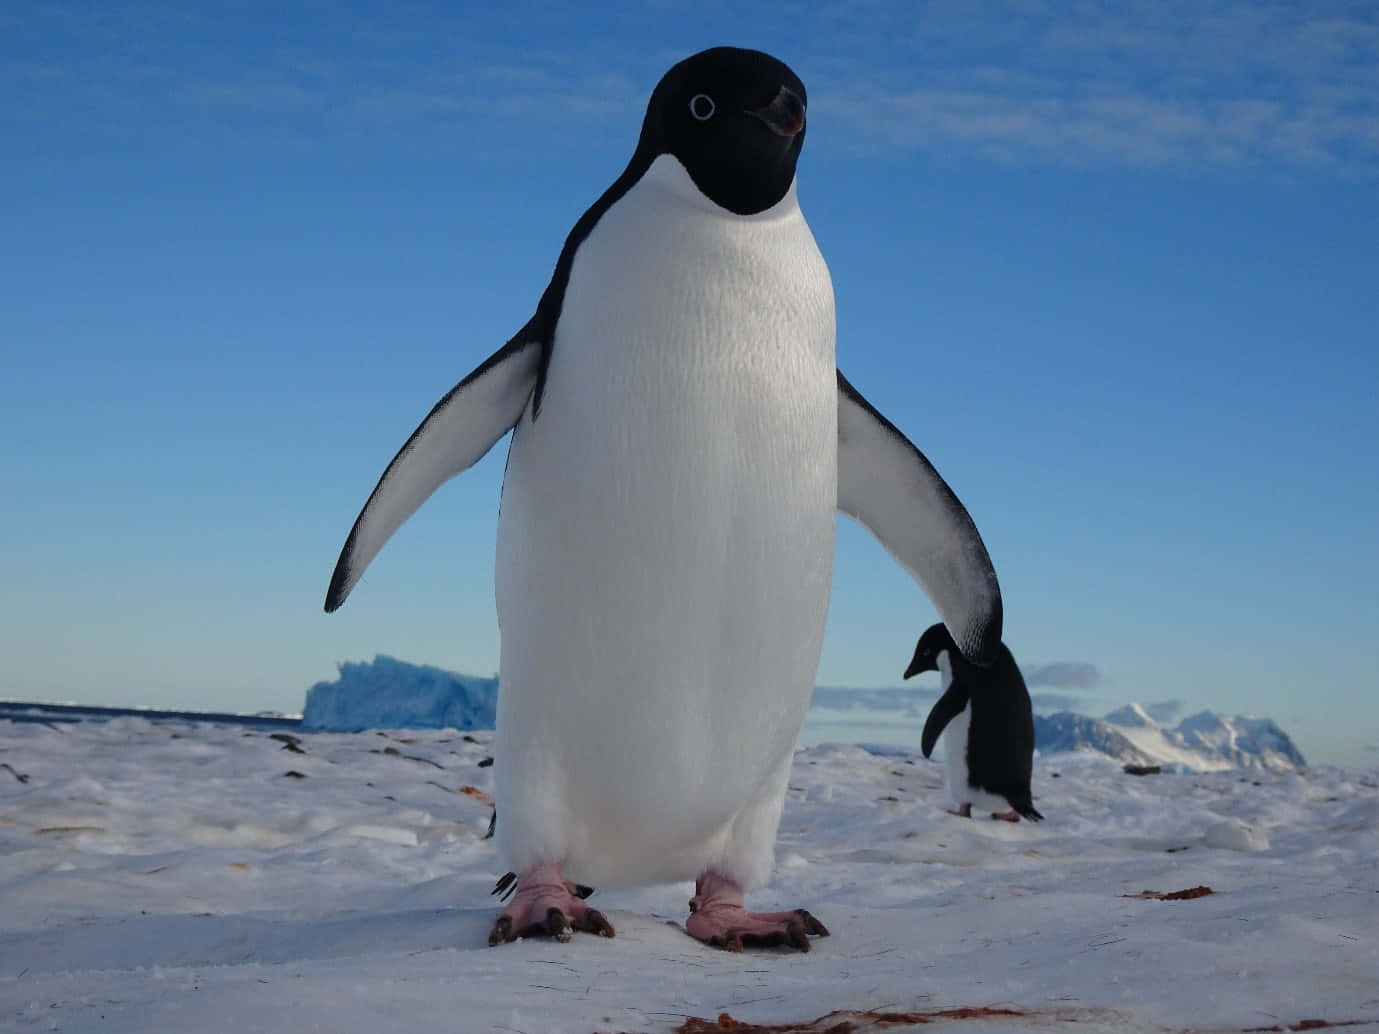 A Penguin Standing On A Snowy Beach With A Blue Sky